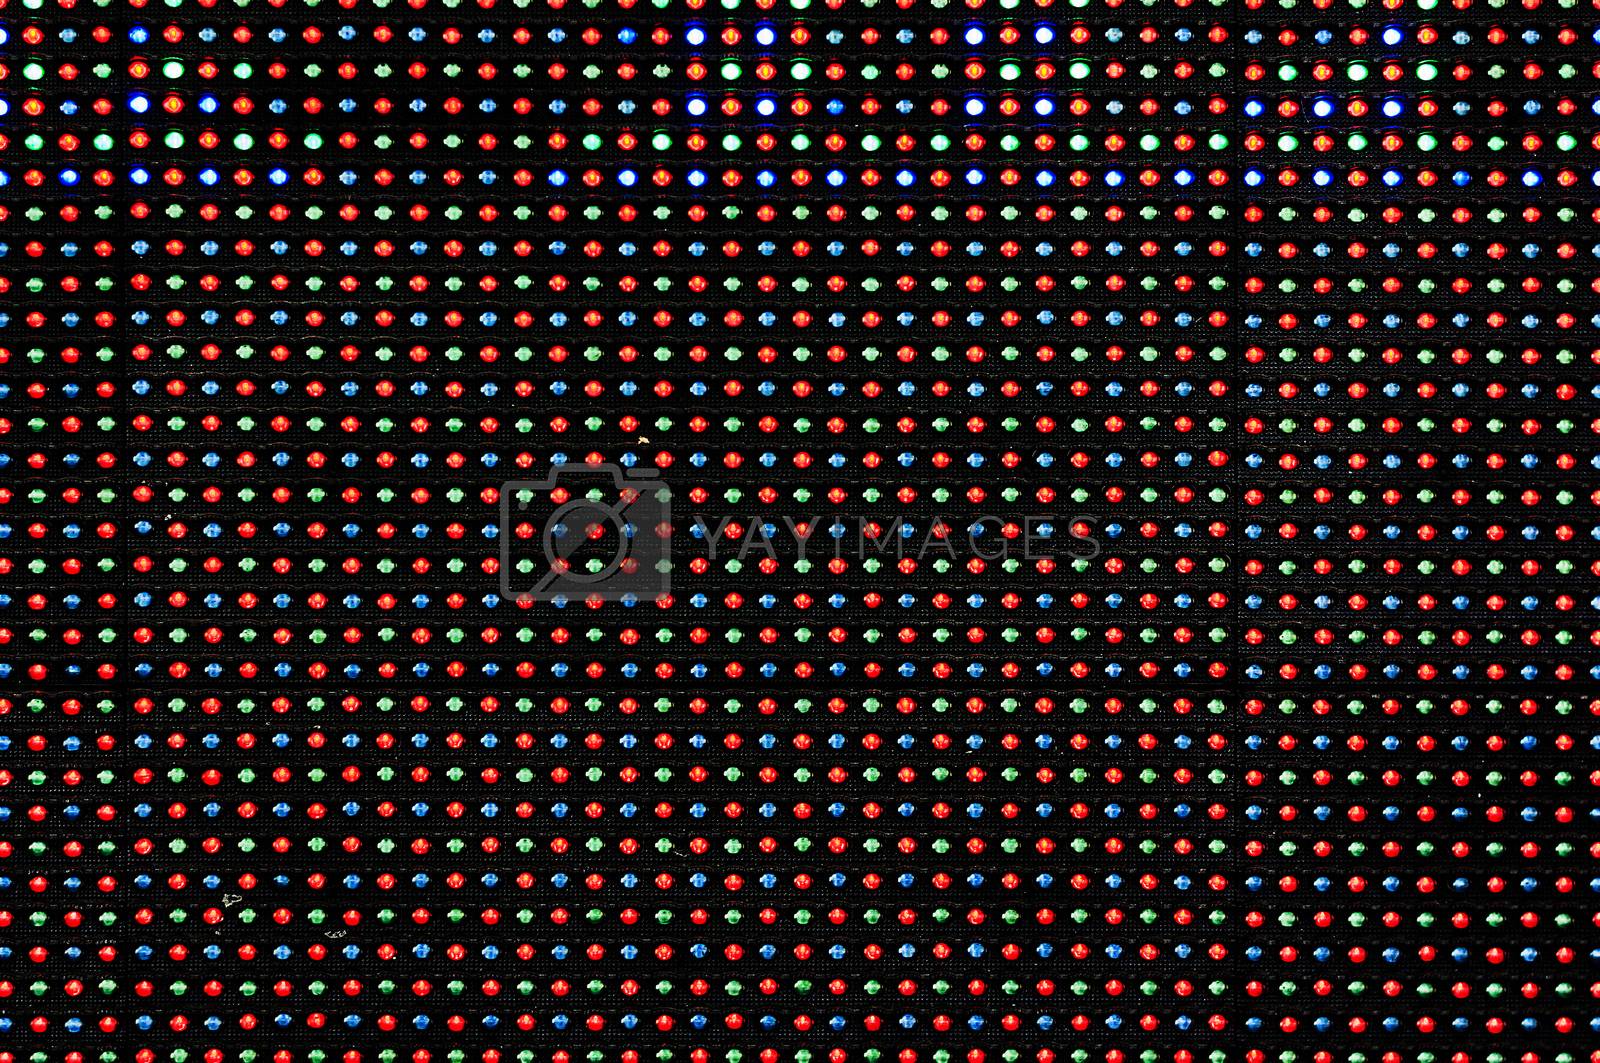 LED Display as Technology Background - Red, Green and Blue LED Lamp Diodes